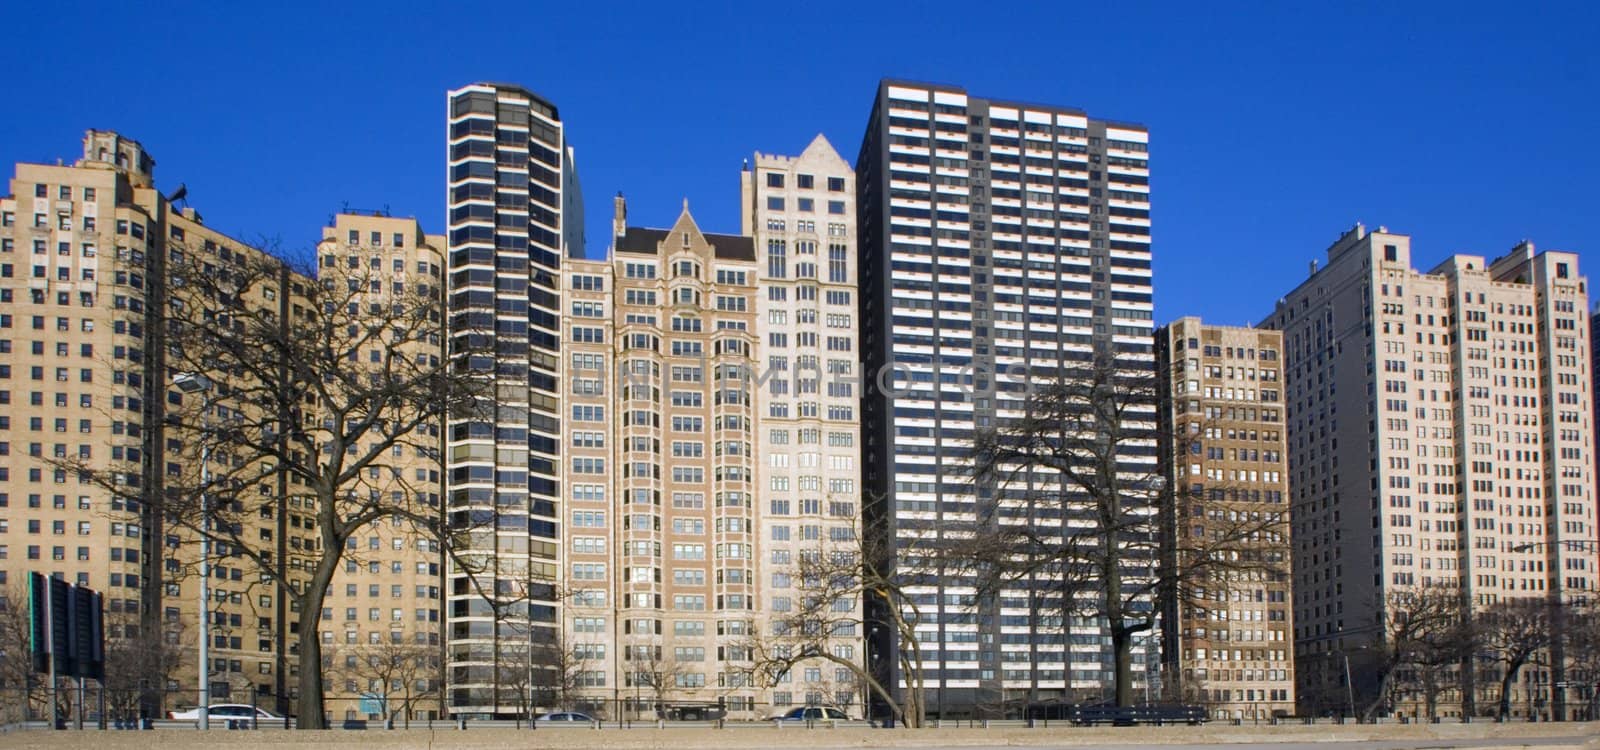 Buildings by Lake Shore Drive in Chicago by benkrut